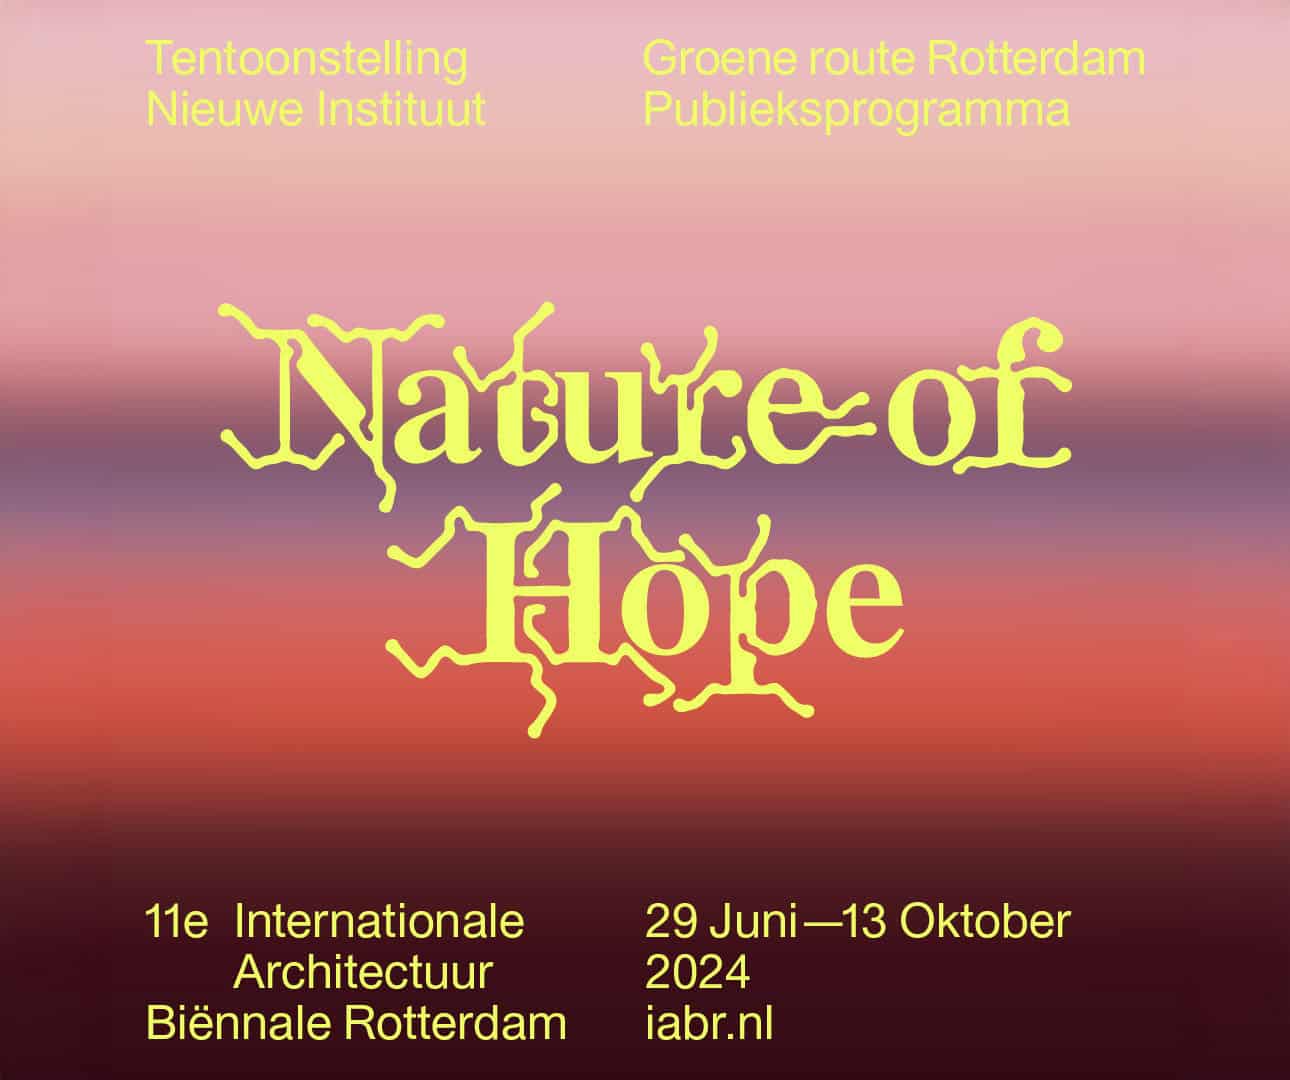 Explore 'Nature of Hope' at Het Nieuwe Instituut from June 29 to October 13, 2024, showcasing innovative ecological architecture and sustainable design practices.